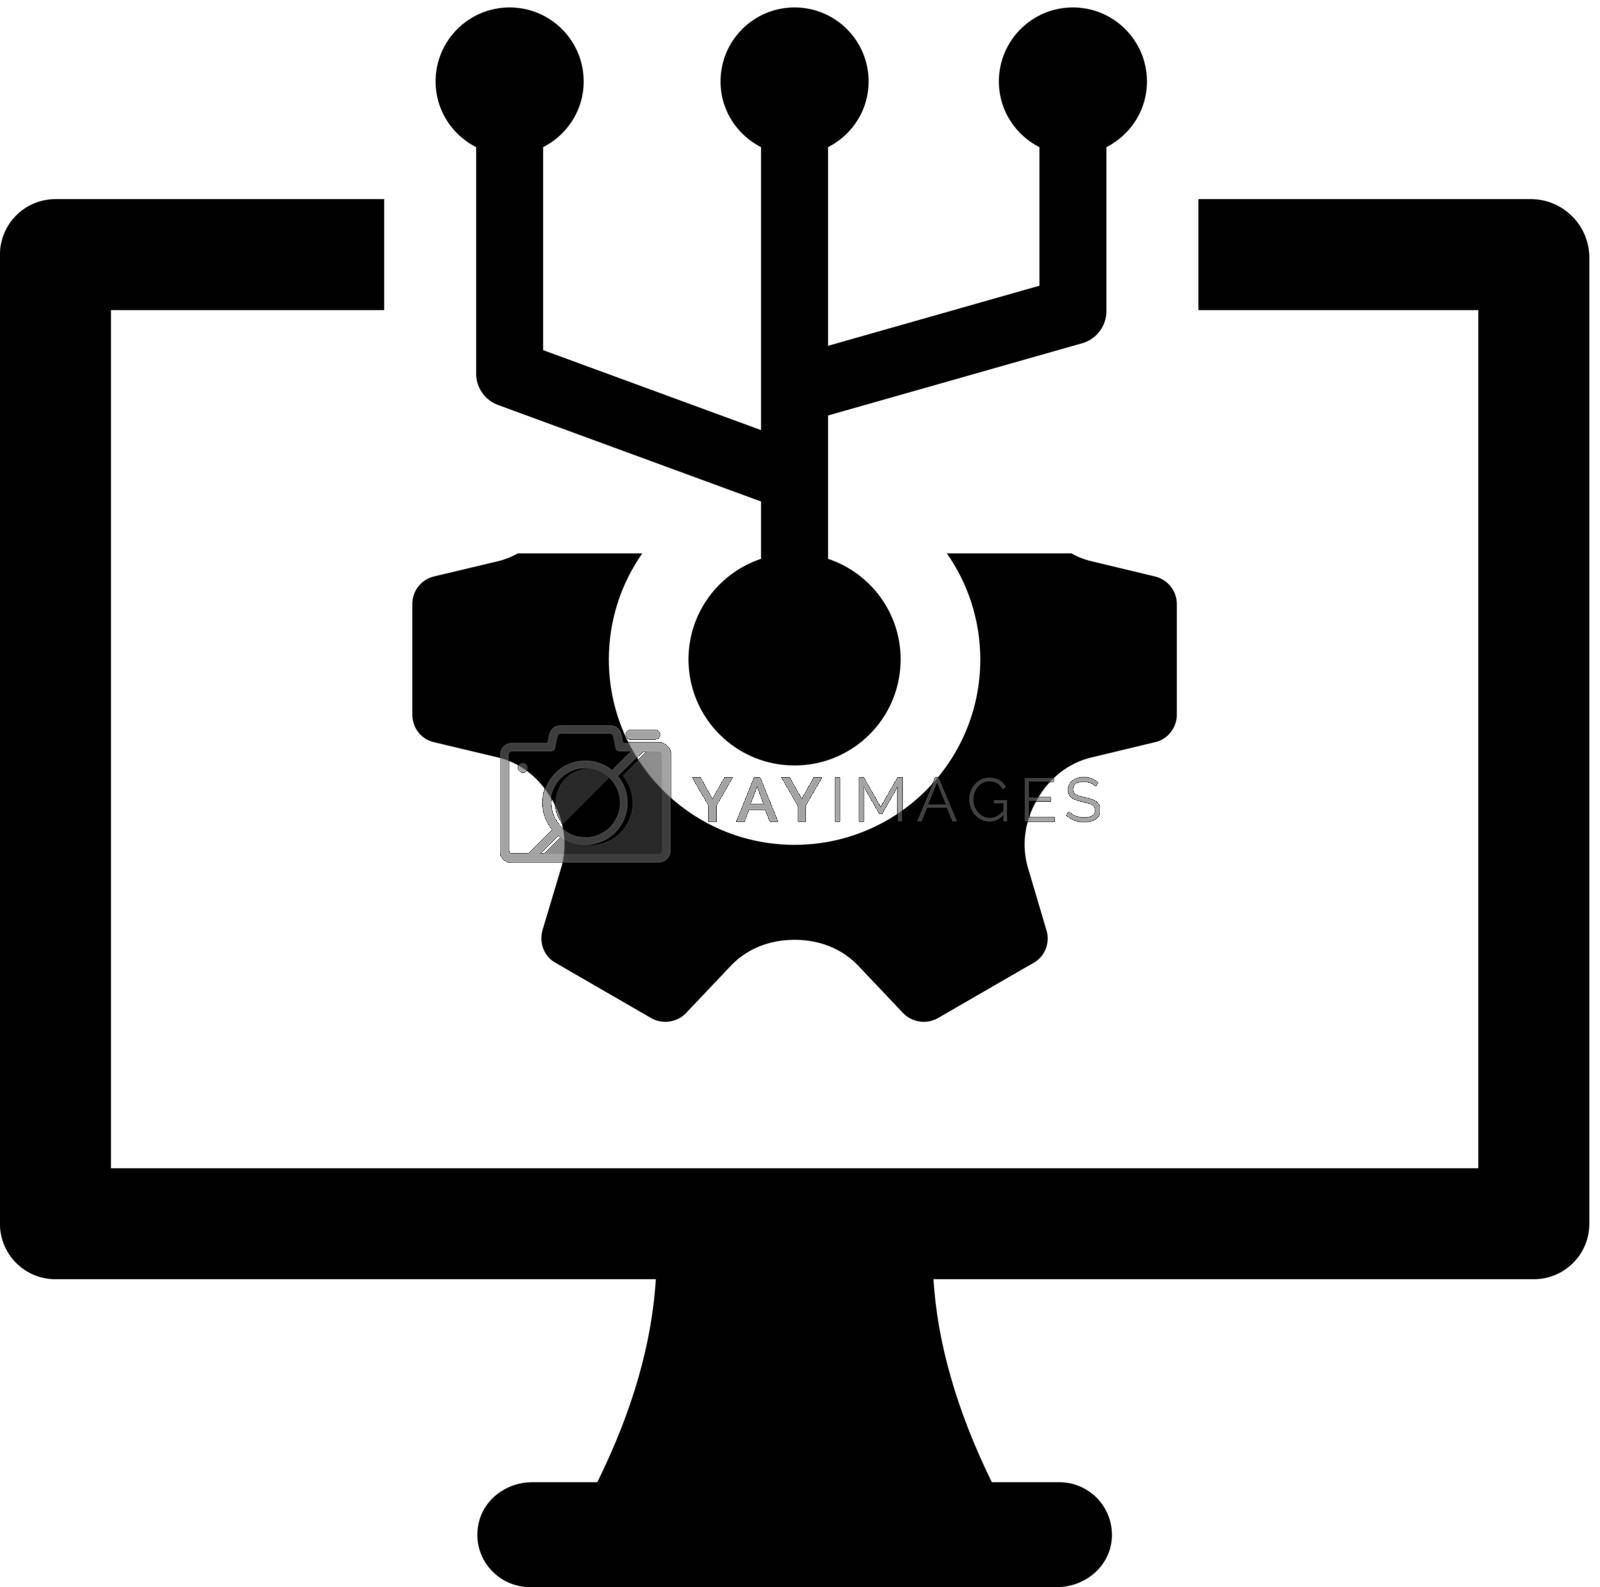 Information technology icon. Vector EPS file.